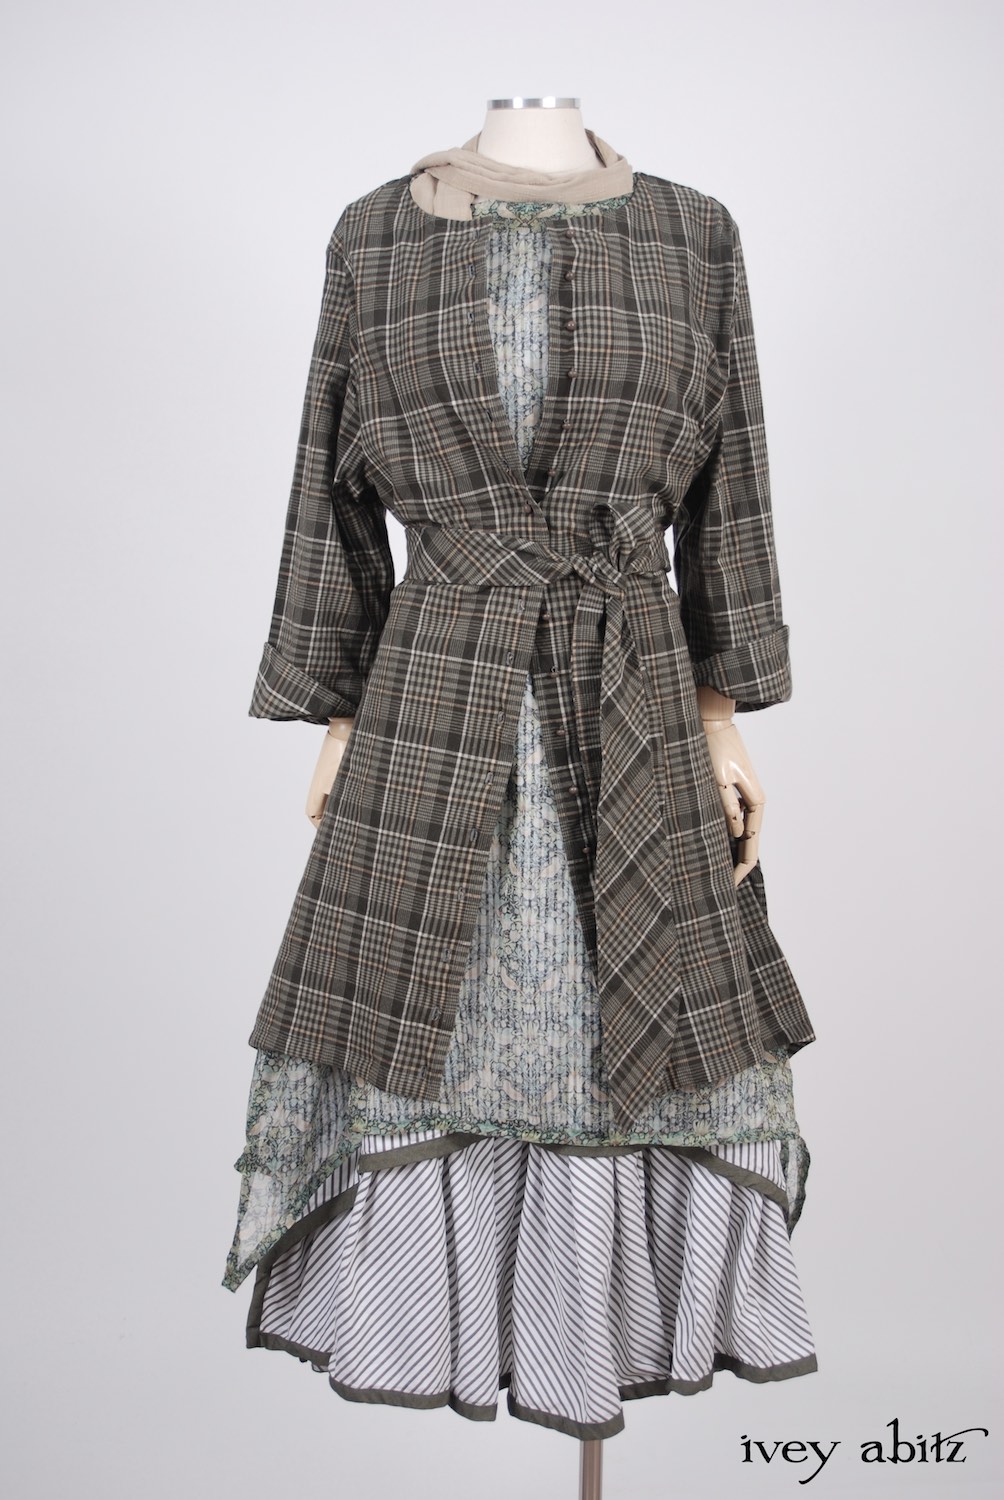 Ivey Abitz - Wildefield Duster Coat in Meadow Stretchy Plaid Cotton, High Water Length - Wildefield Frock in Bird and Vine Silk Organza  - Limited Edition Striped Blanchefleur Frock in Morning Meadow Striped Cotton, High Water Length  - Blanchefleur Sash in Blushed Plaid Voile